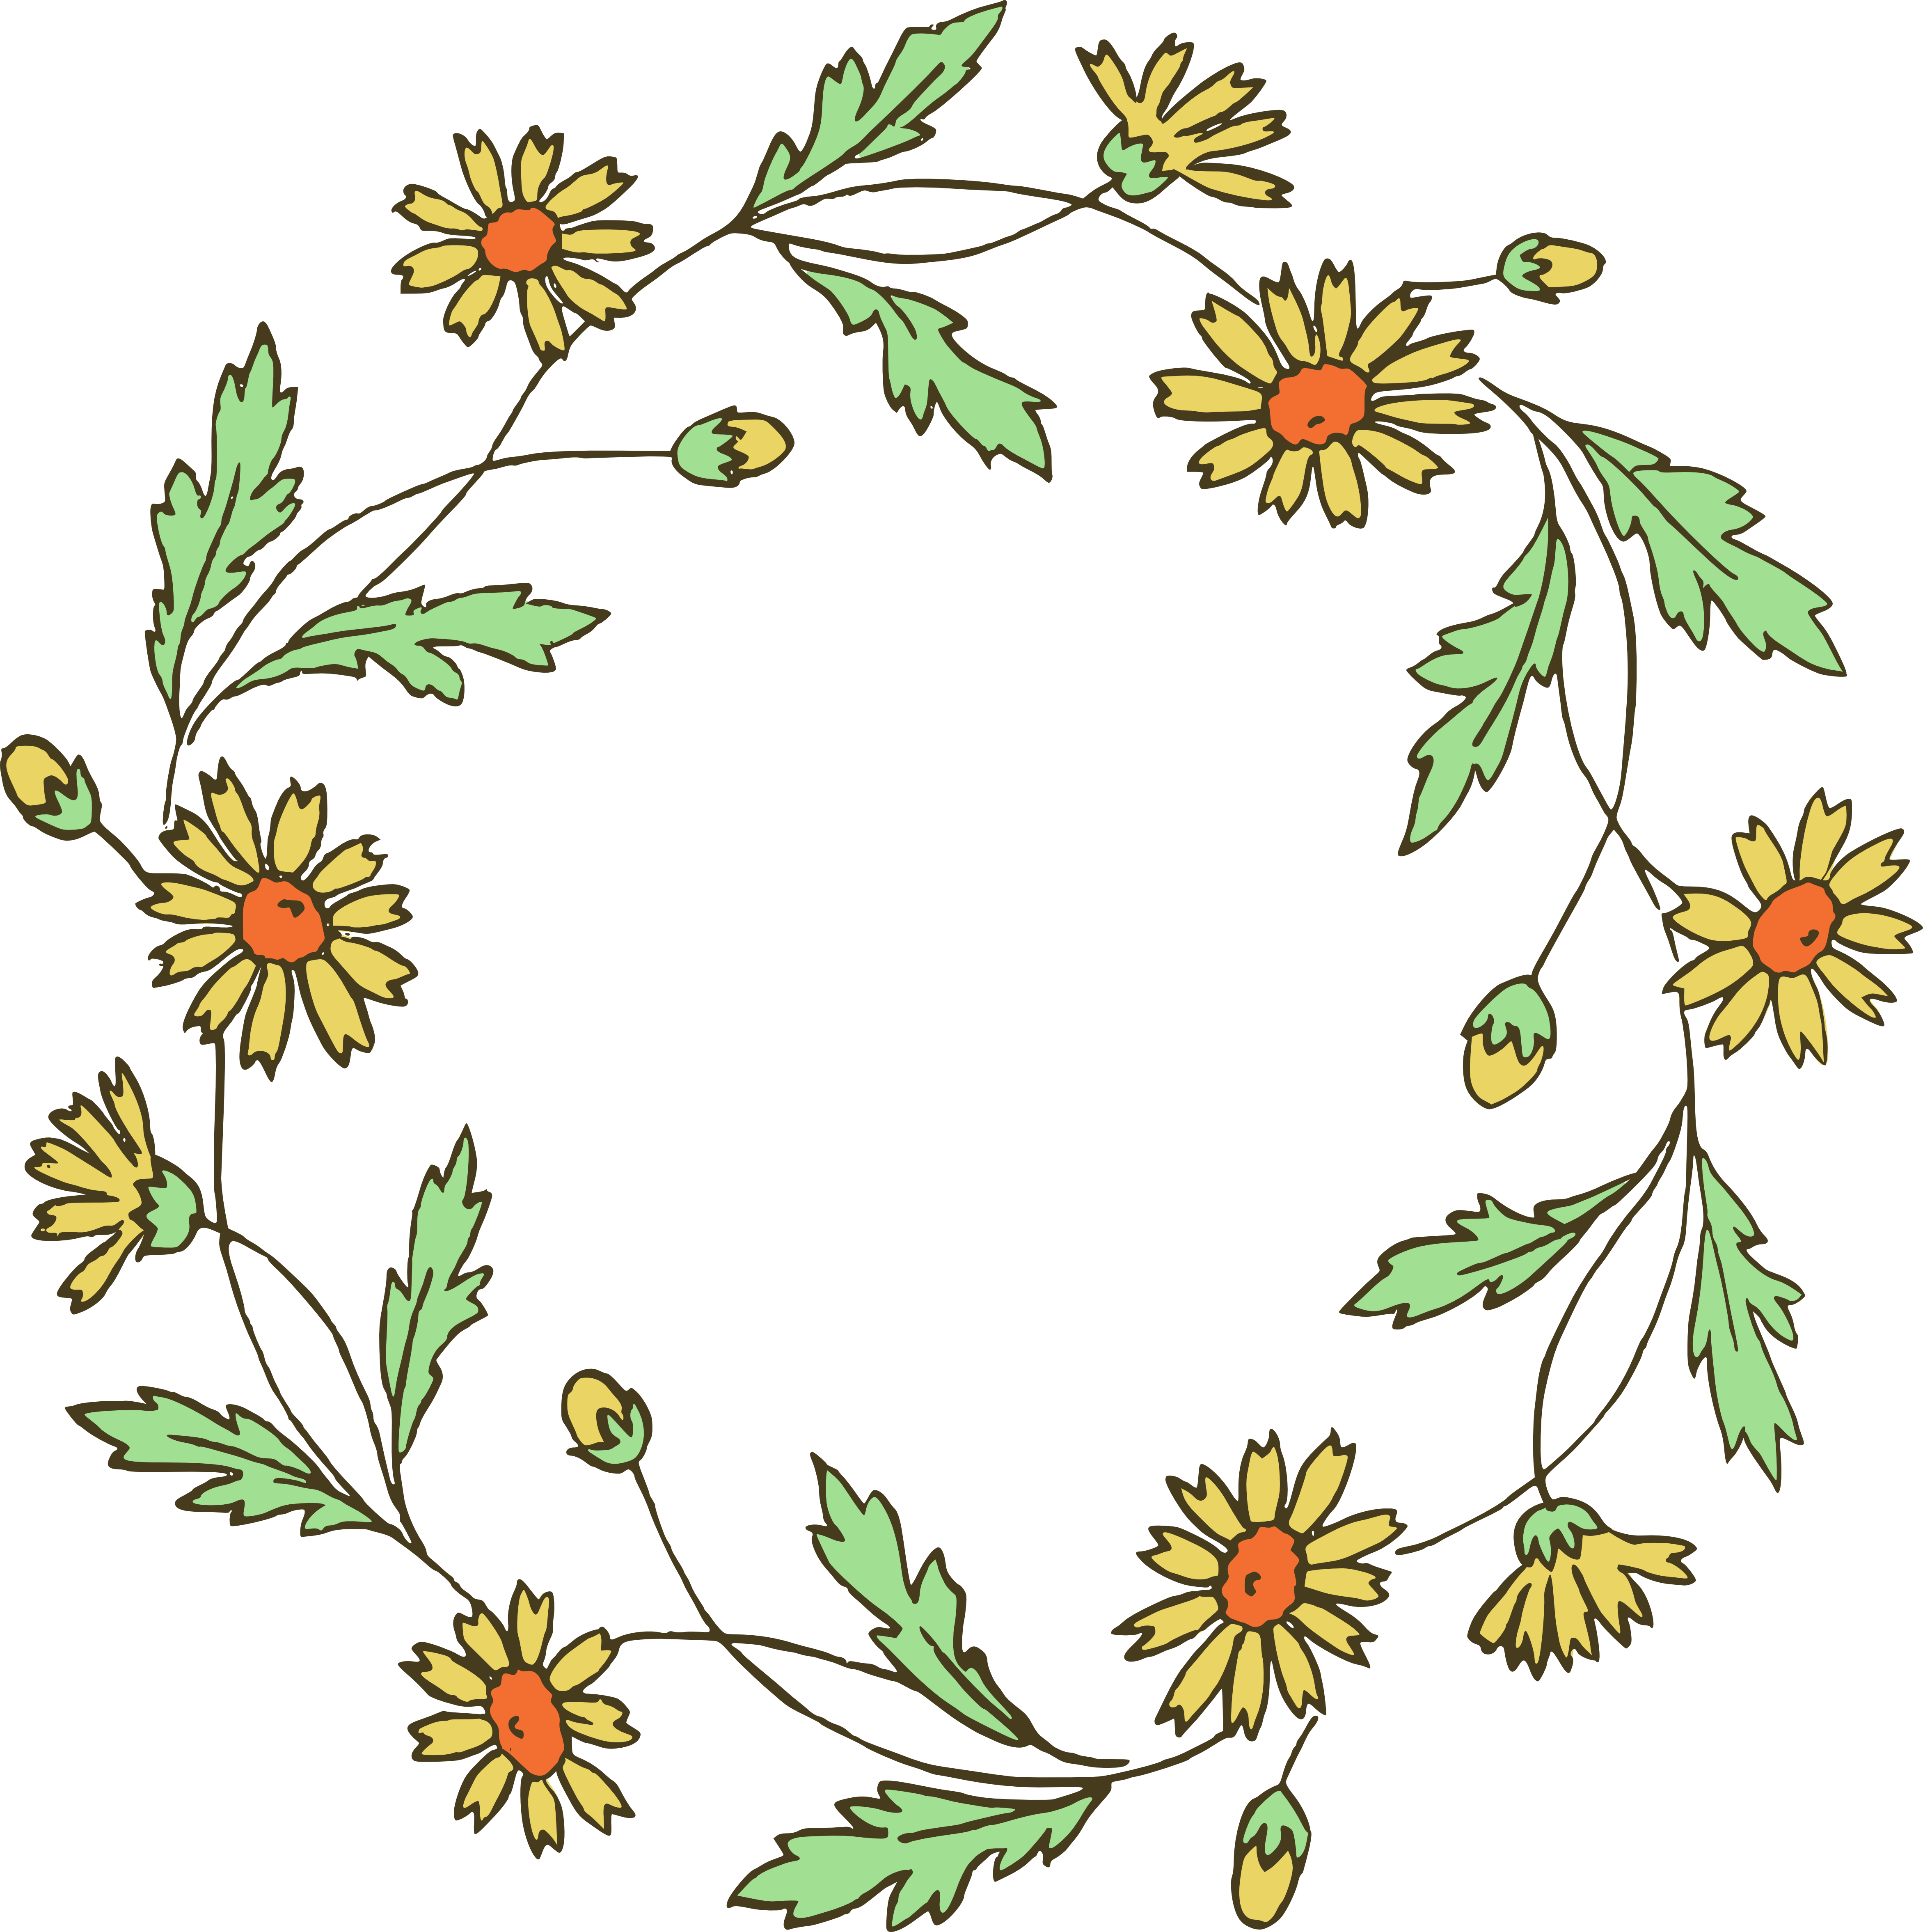 Floral Wreath Clip Art & Vector Images | Oh So Nifty Vintage Graphics